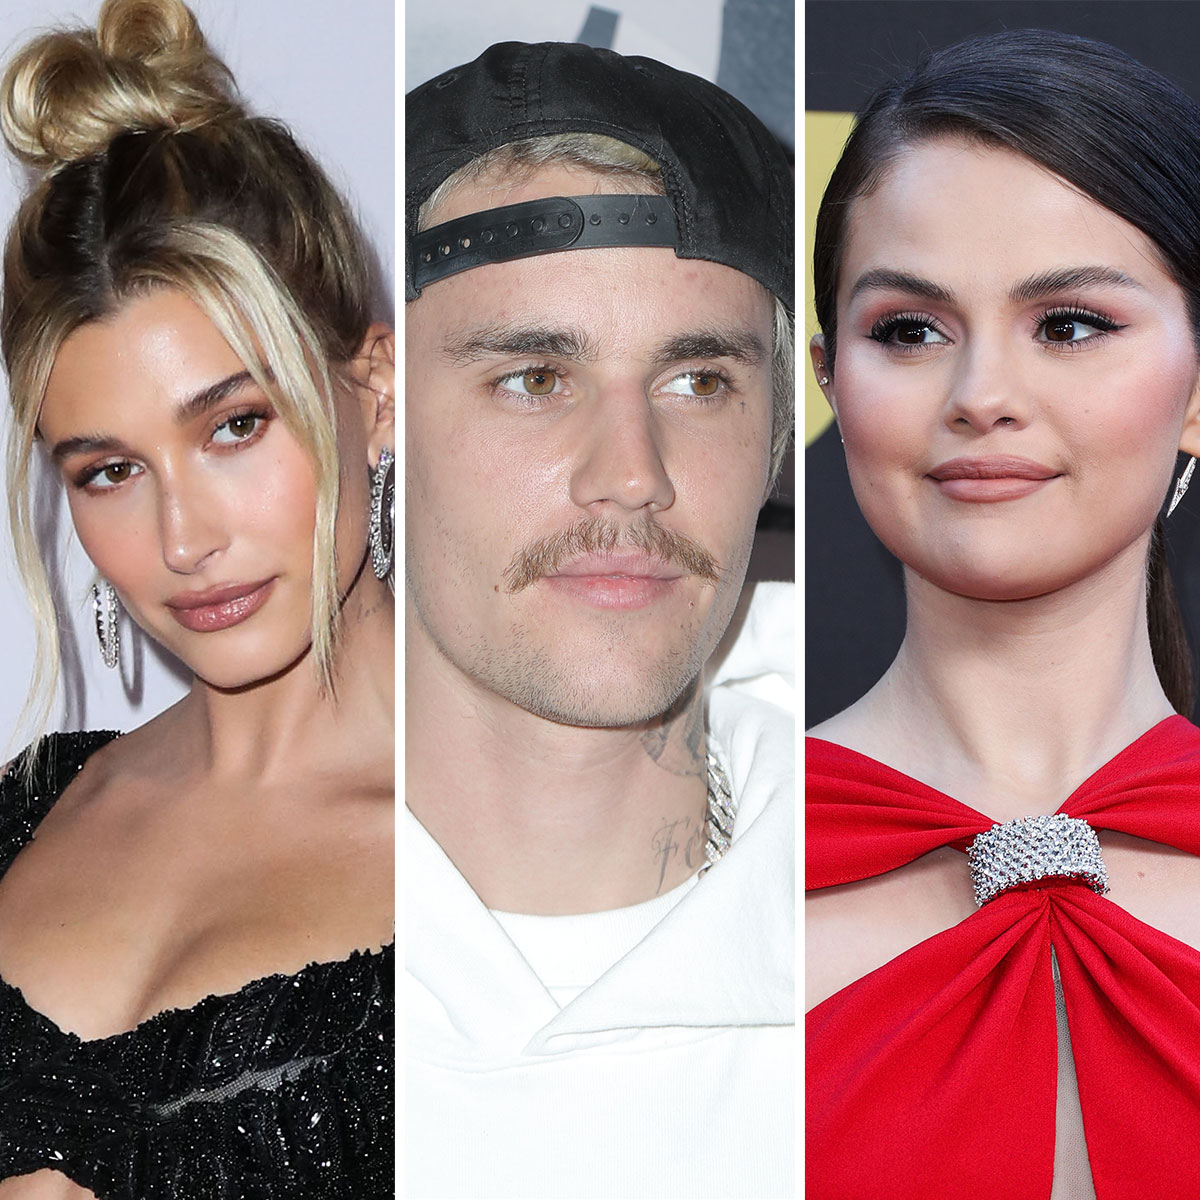 Hailey Bieber Just Broke Her Silence About Claims That She ‘Stole’ Justin Bieber From Selena Gomez